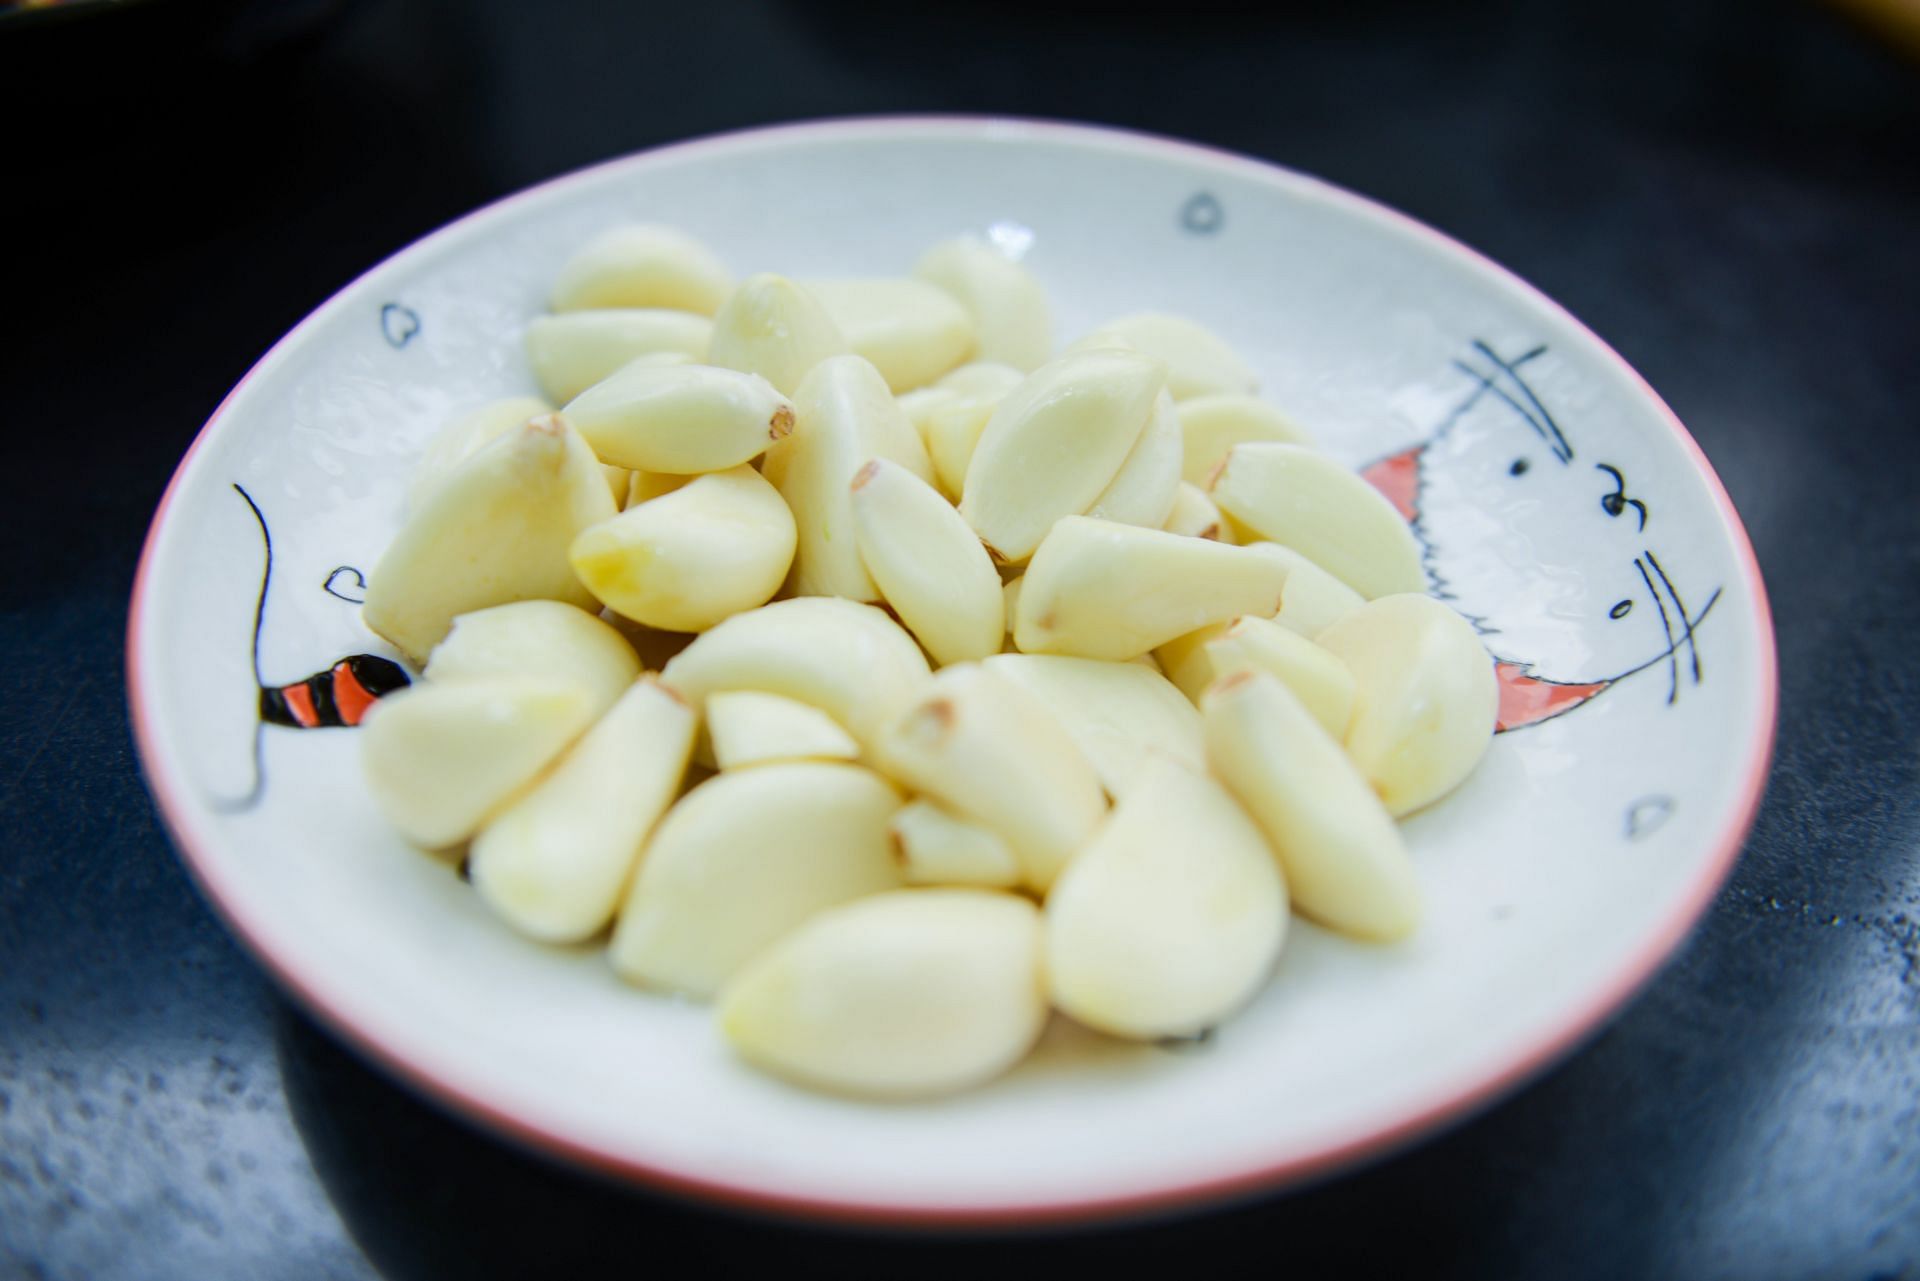 Garlic for blood pressure benefits (image sourced via Pexels / Photo by Cats)